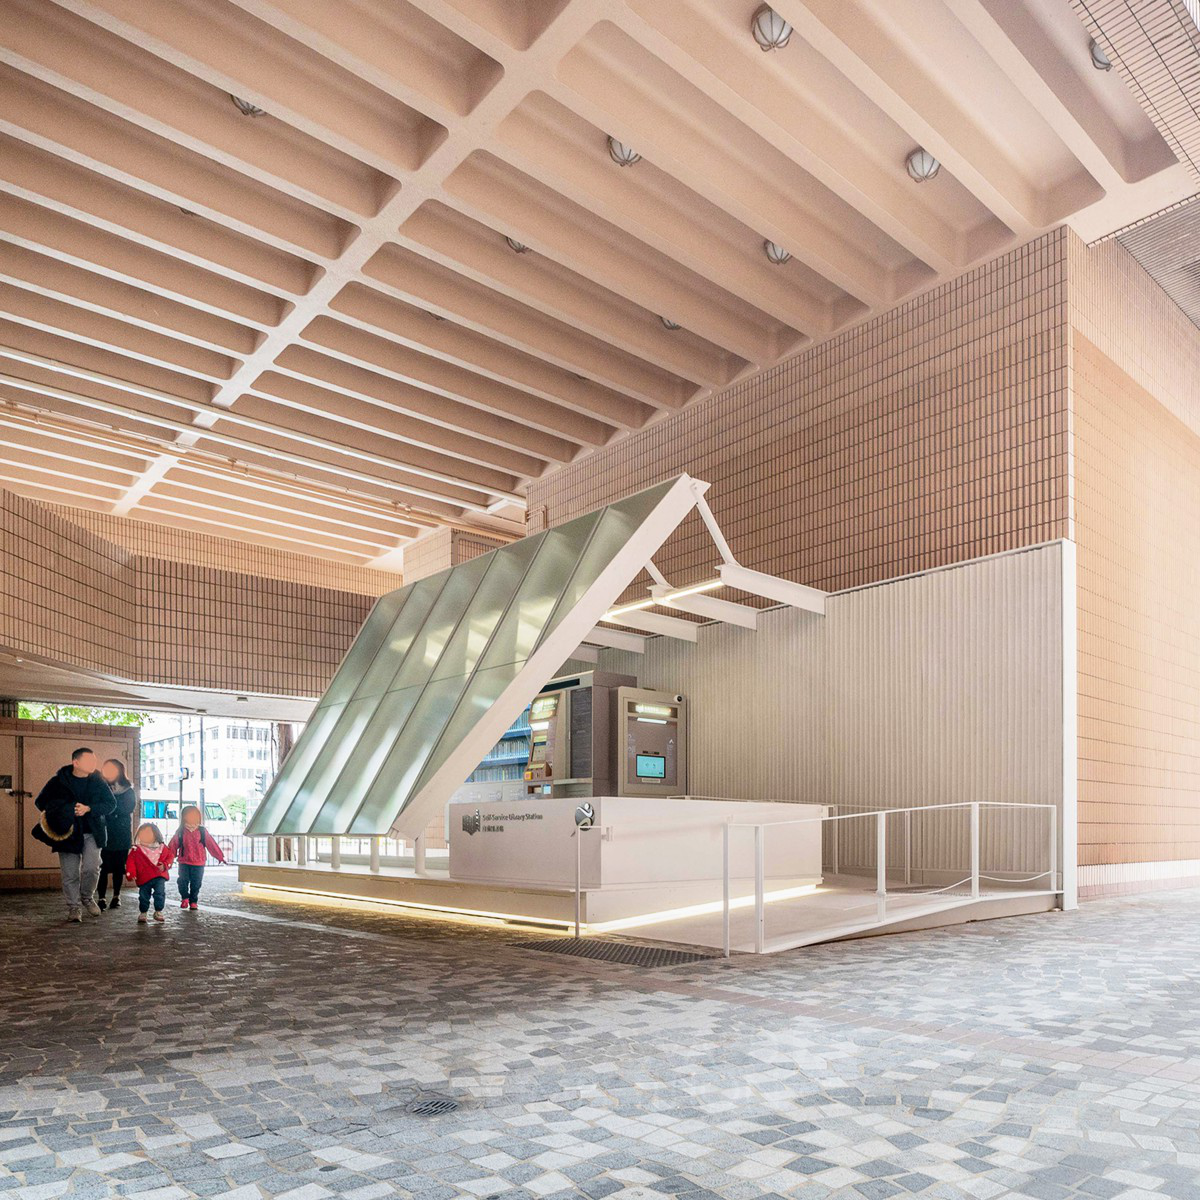 The Urban Serene Library Station by Architectural Services Department